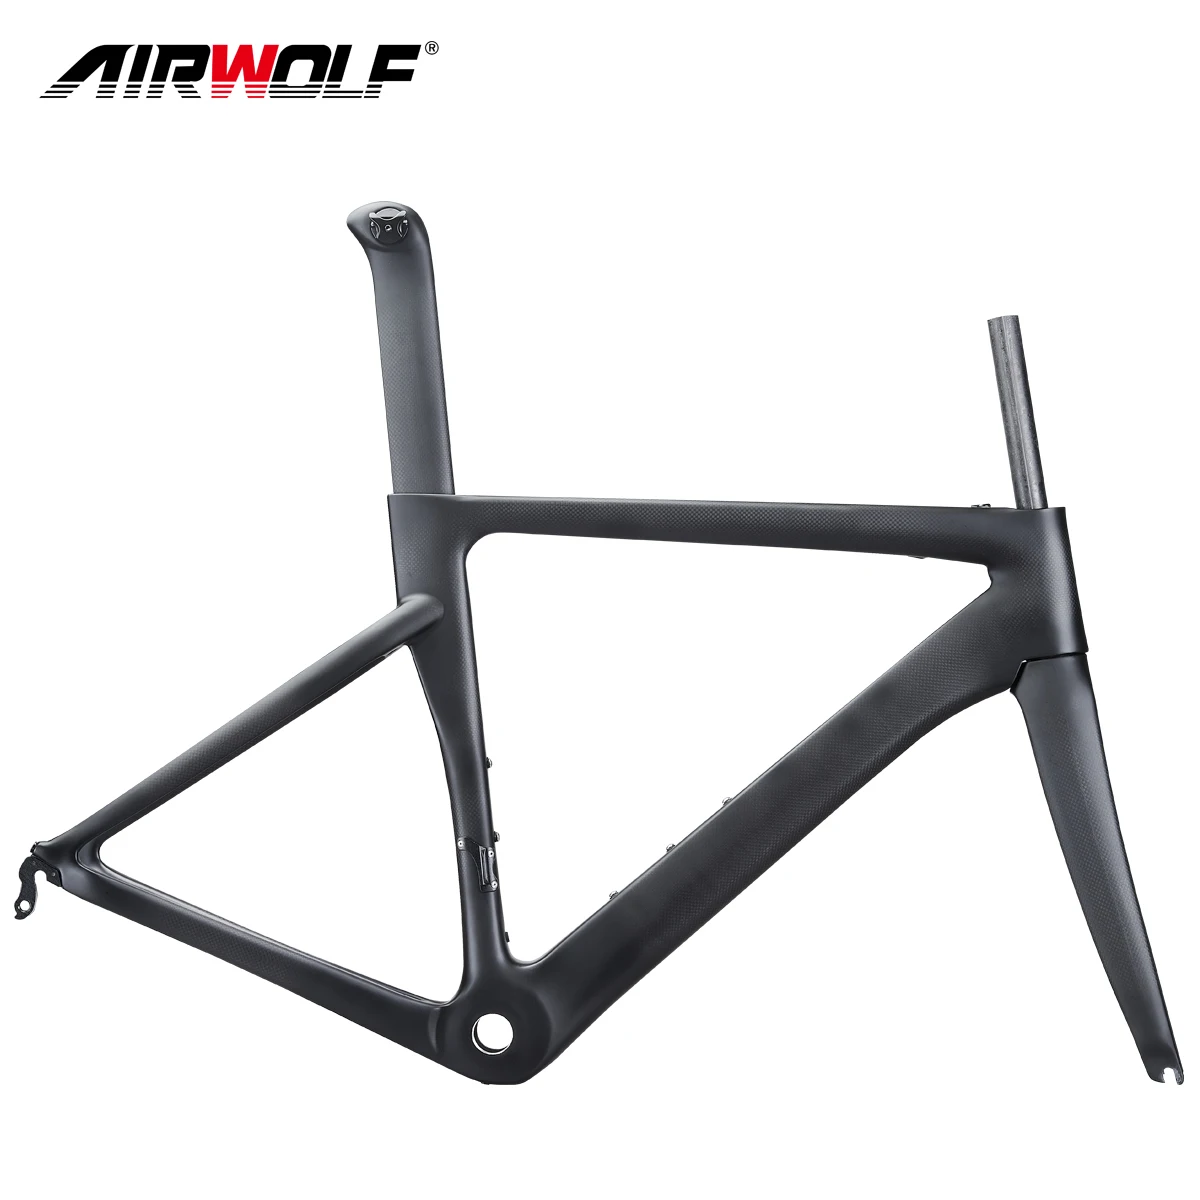 

Airwolf carbon road bike frame Di2 and Mechanical framework bicycle size in 48/51/54/56cm carbon bike frame, All colors available